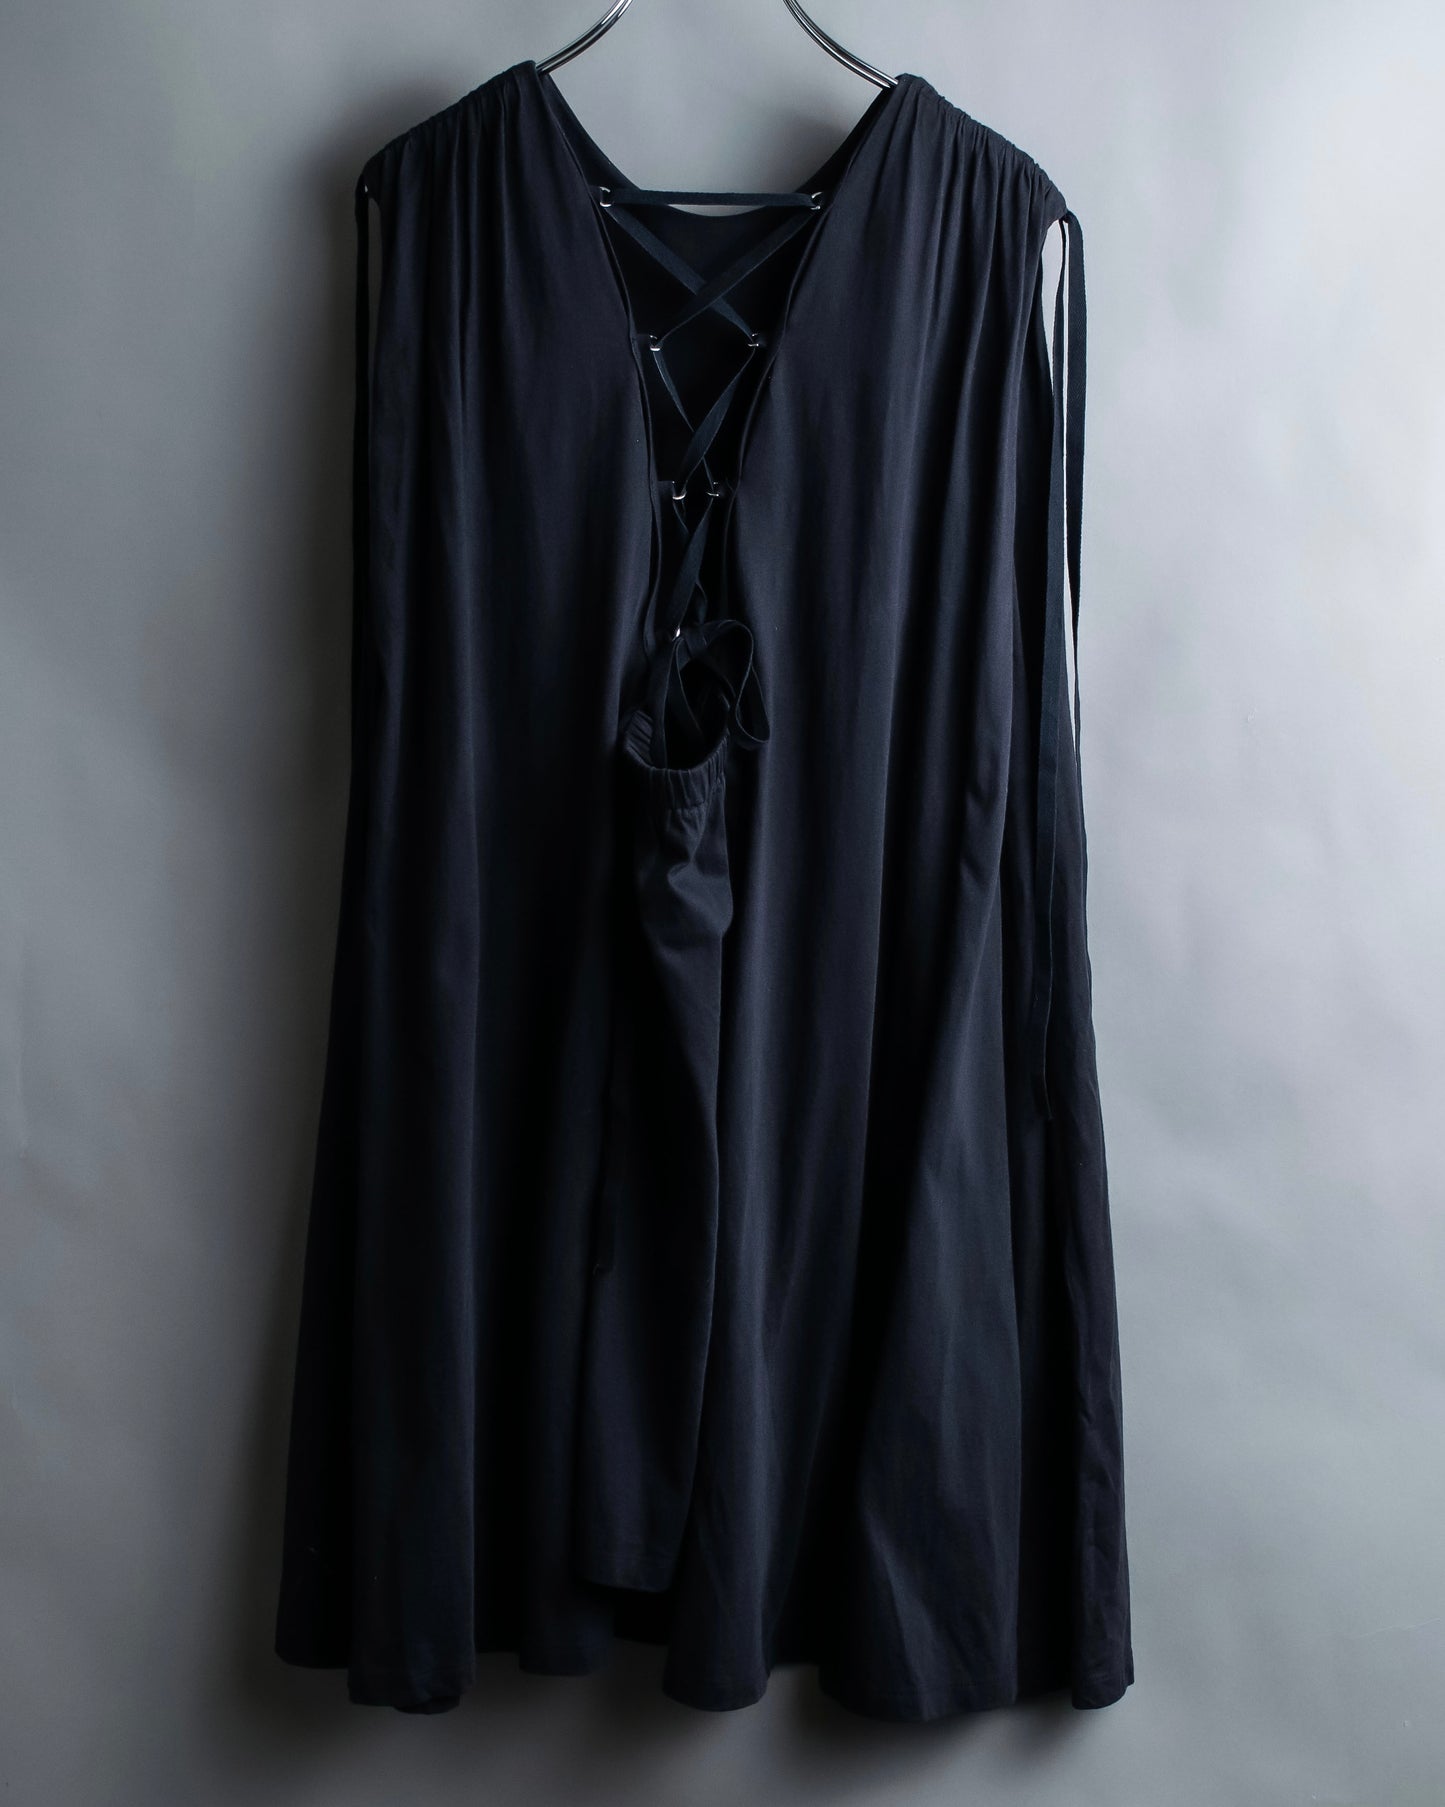 “N°21” Lace up designed no sleeves one piece